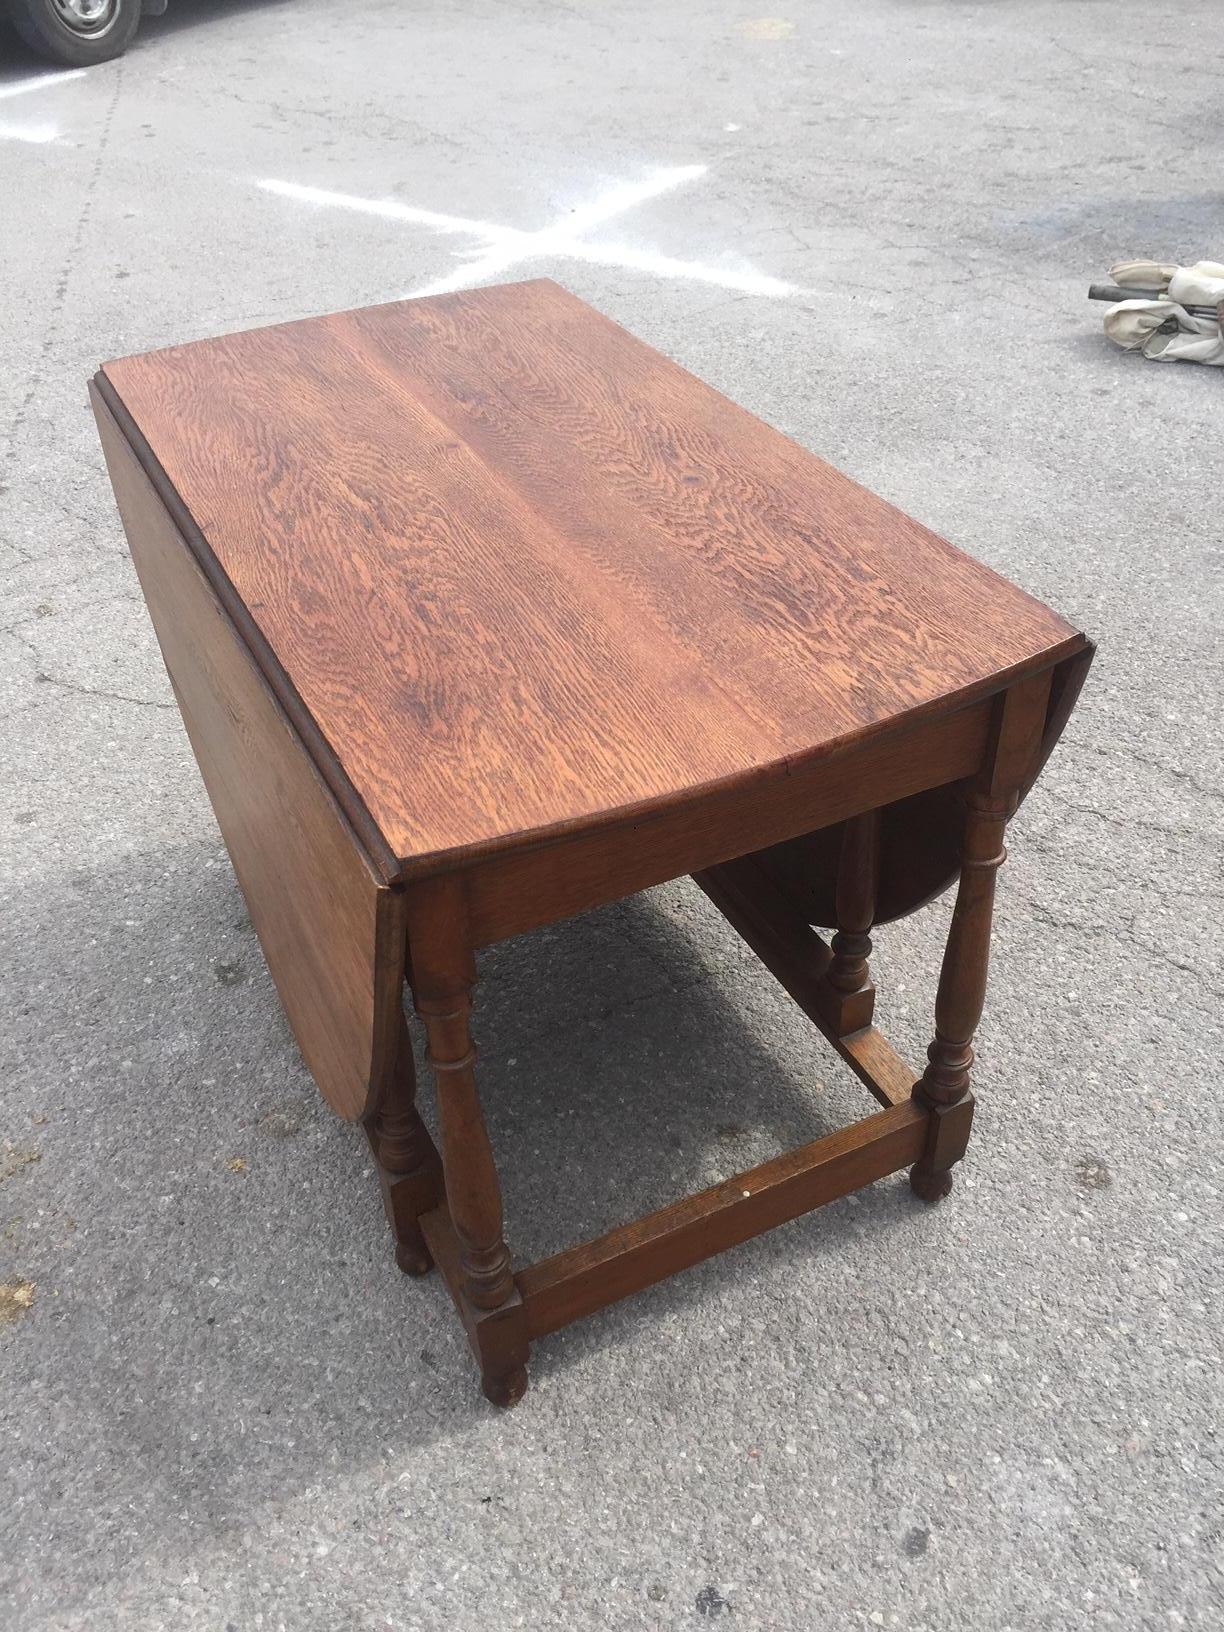 Very nice early 20th century French oak gate leg table from the 1900s.
Very good condition. Has been pickled then re waxed. Easy to use.
Very practical table.
Measure width close: 57 cm
width open: 130 cm.